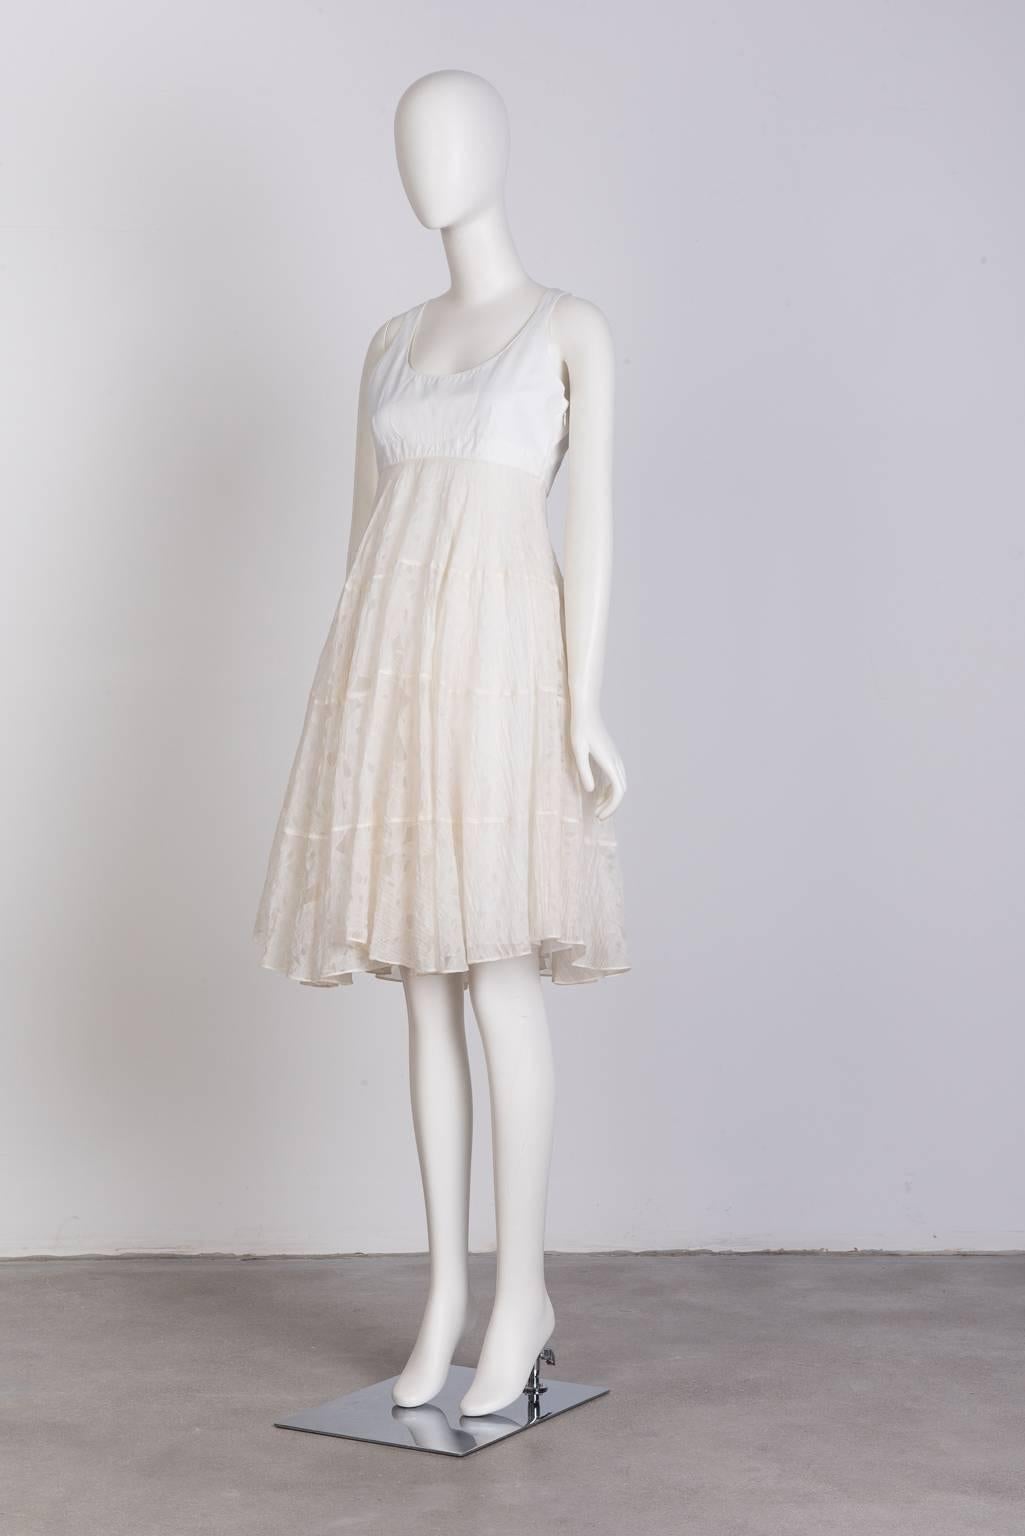 Sleeveless, empire waist dress with crushed silk jaquard skirt and cotton bodice with cut out back detail.